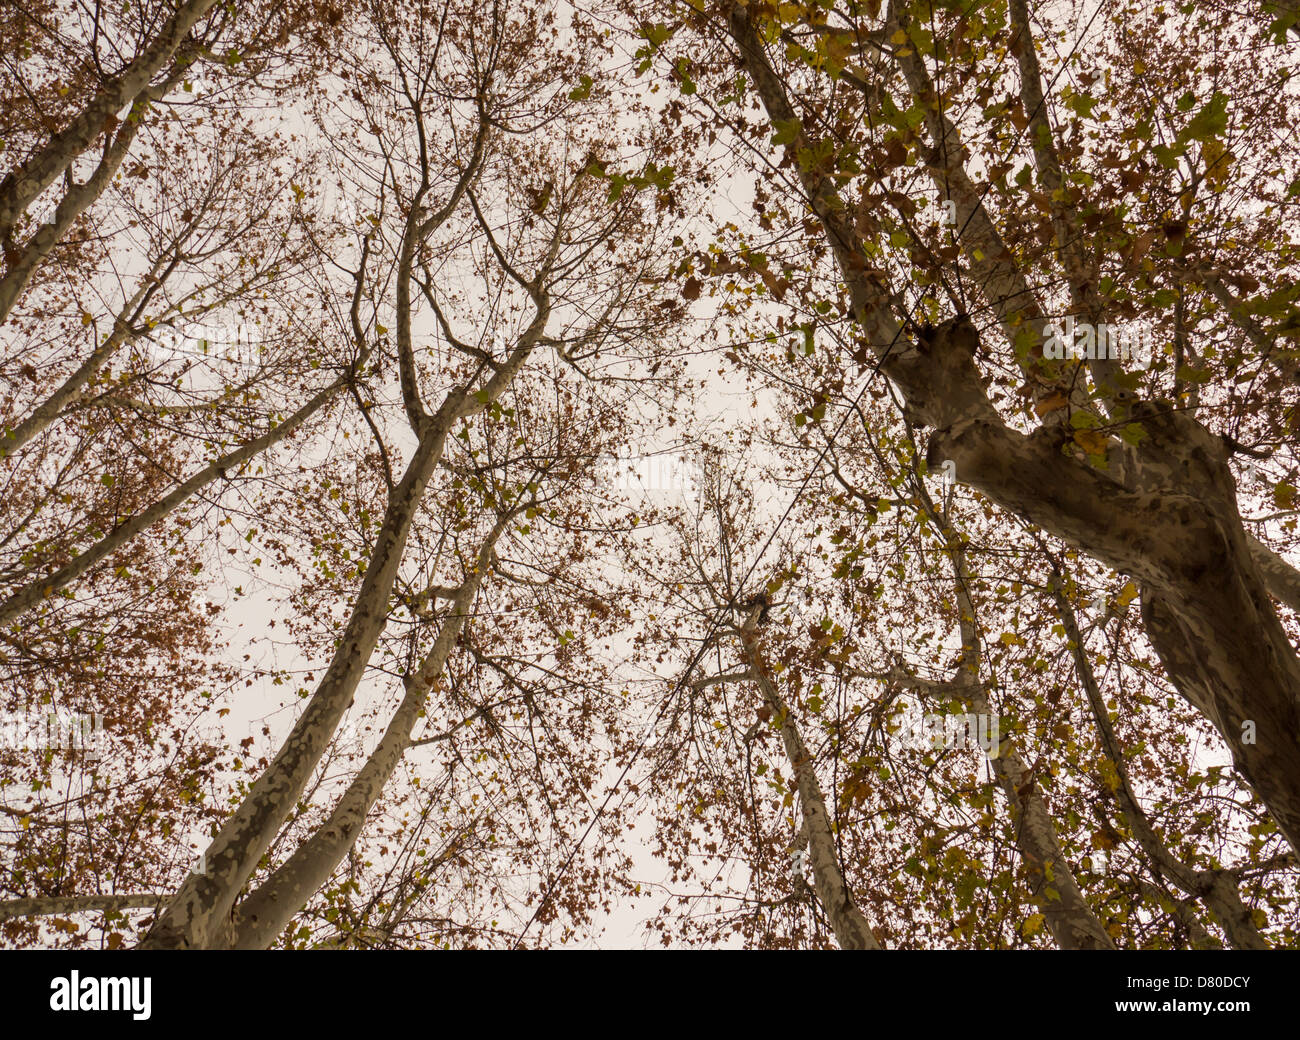 trees and leafless branches taken from below in autumn Stock Photo